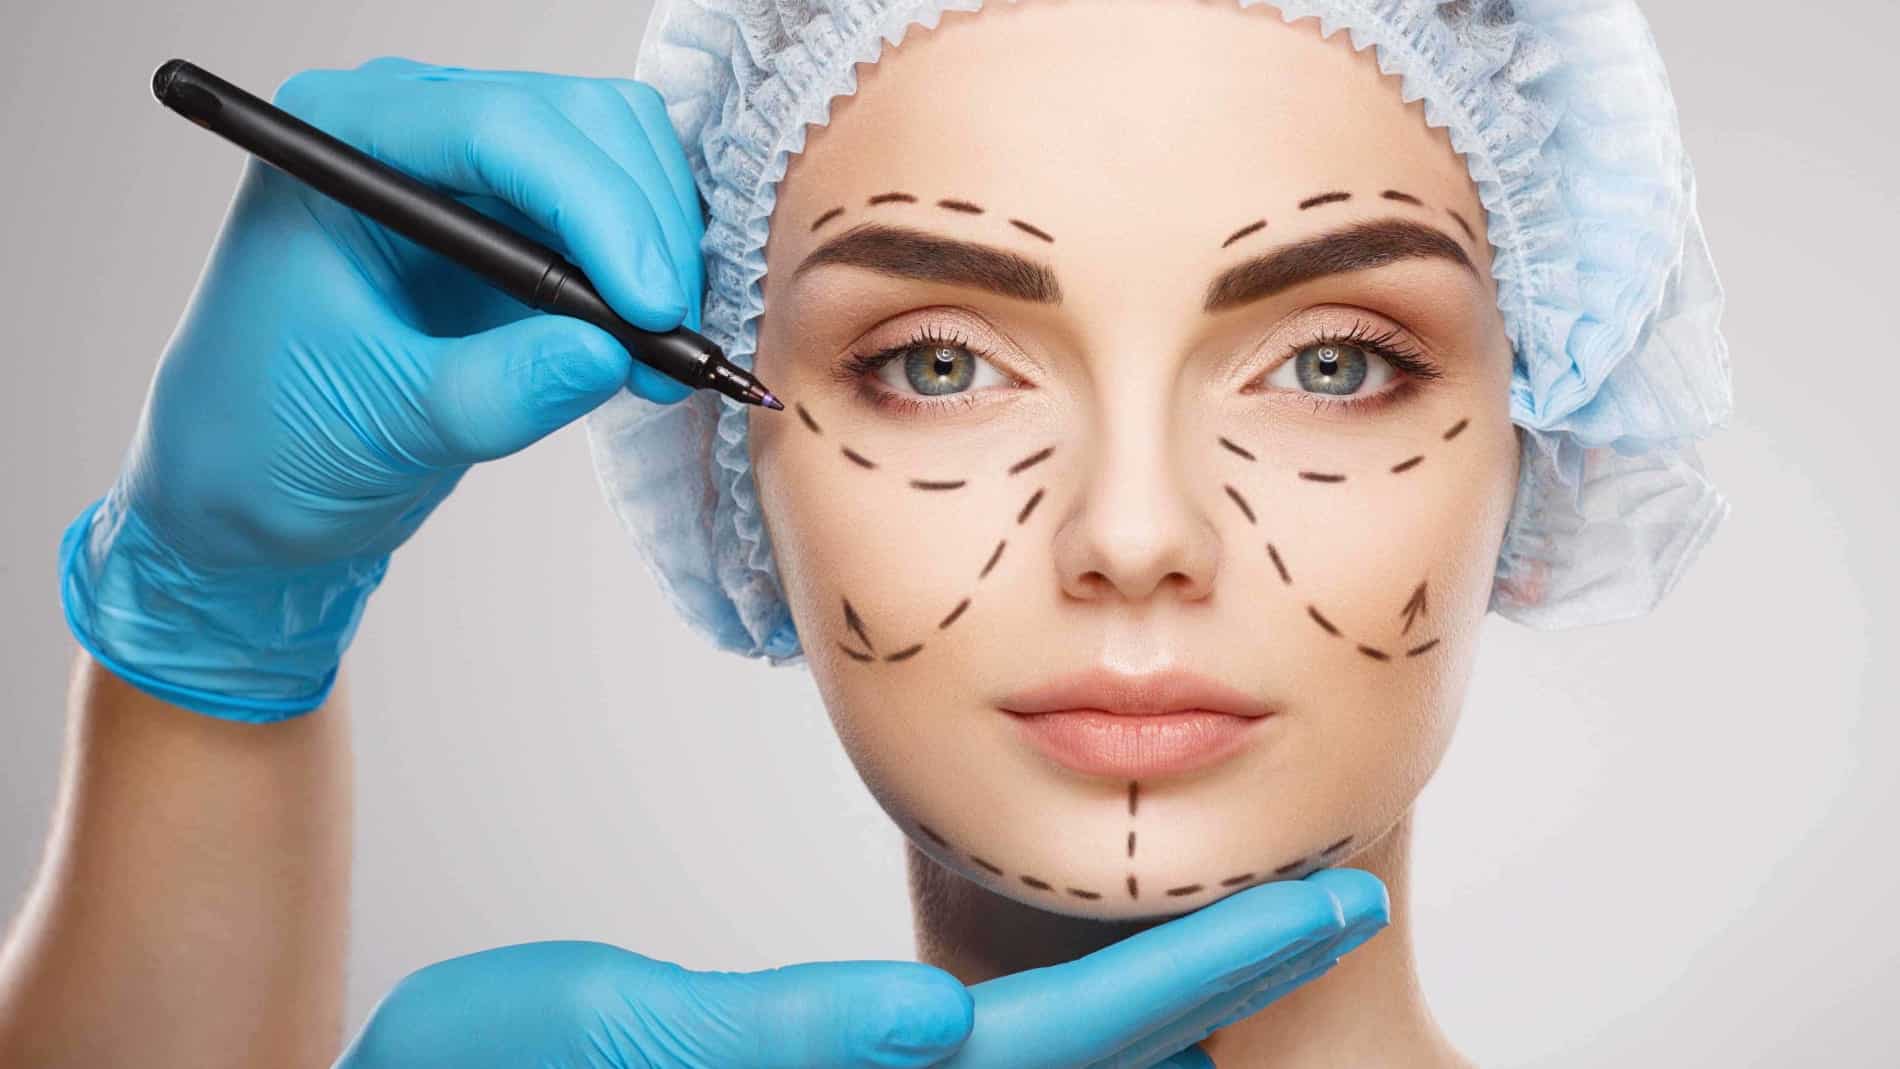 The impact of plastic surgery on self-esteem and body image